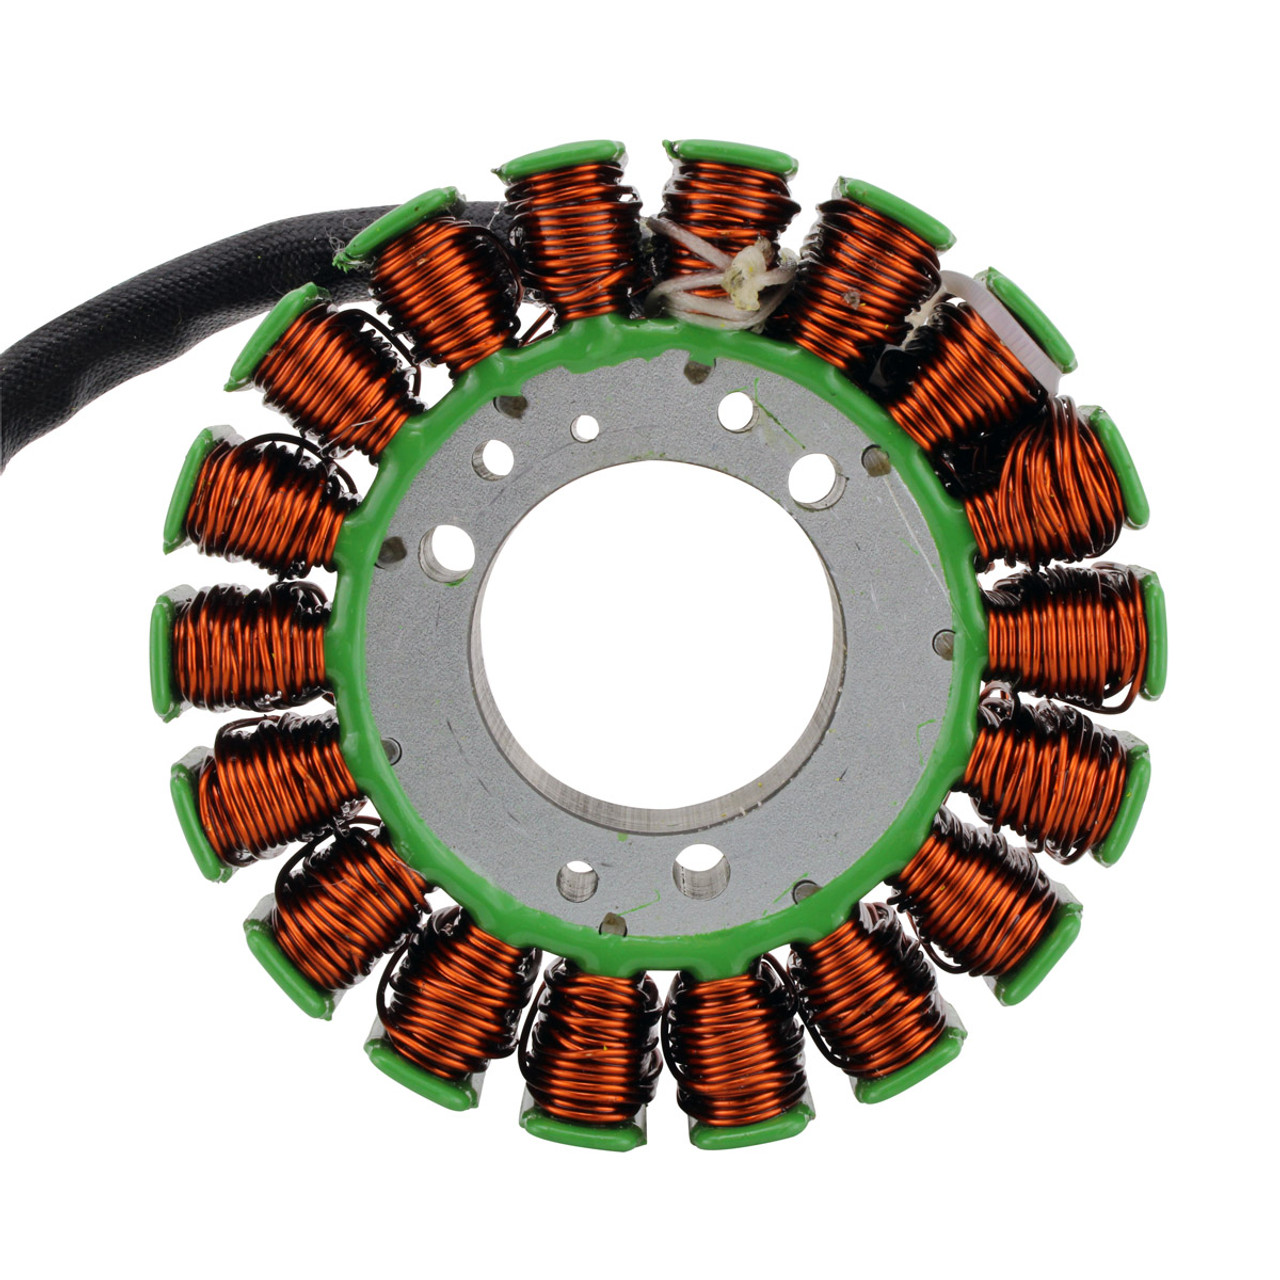 RMSTATOR New Aftermarket Can-am Generator Stator 400 watts, RMS010-106979